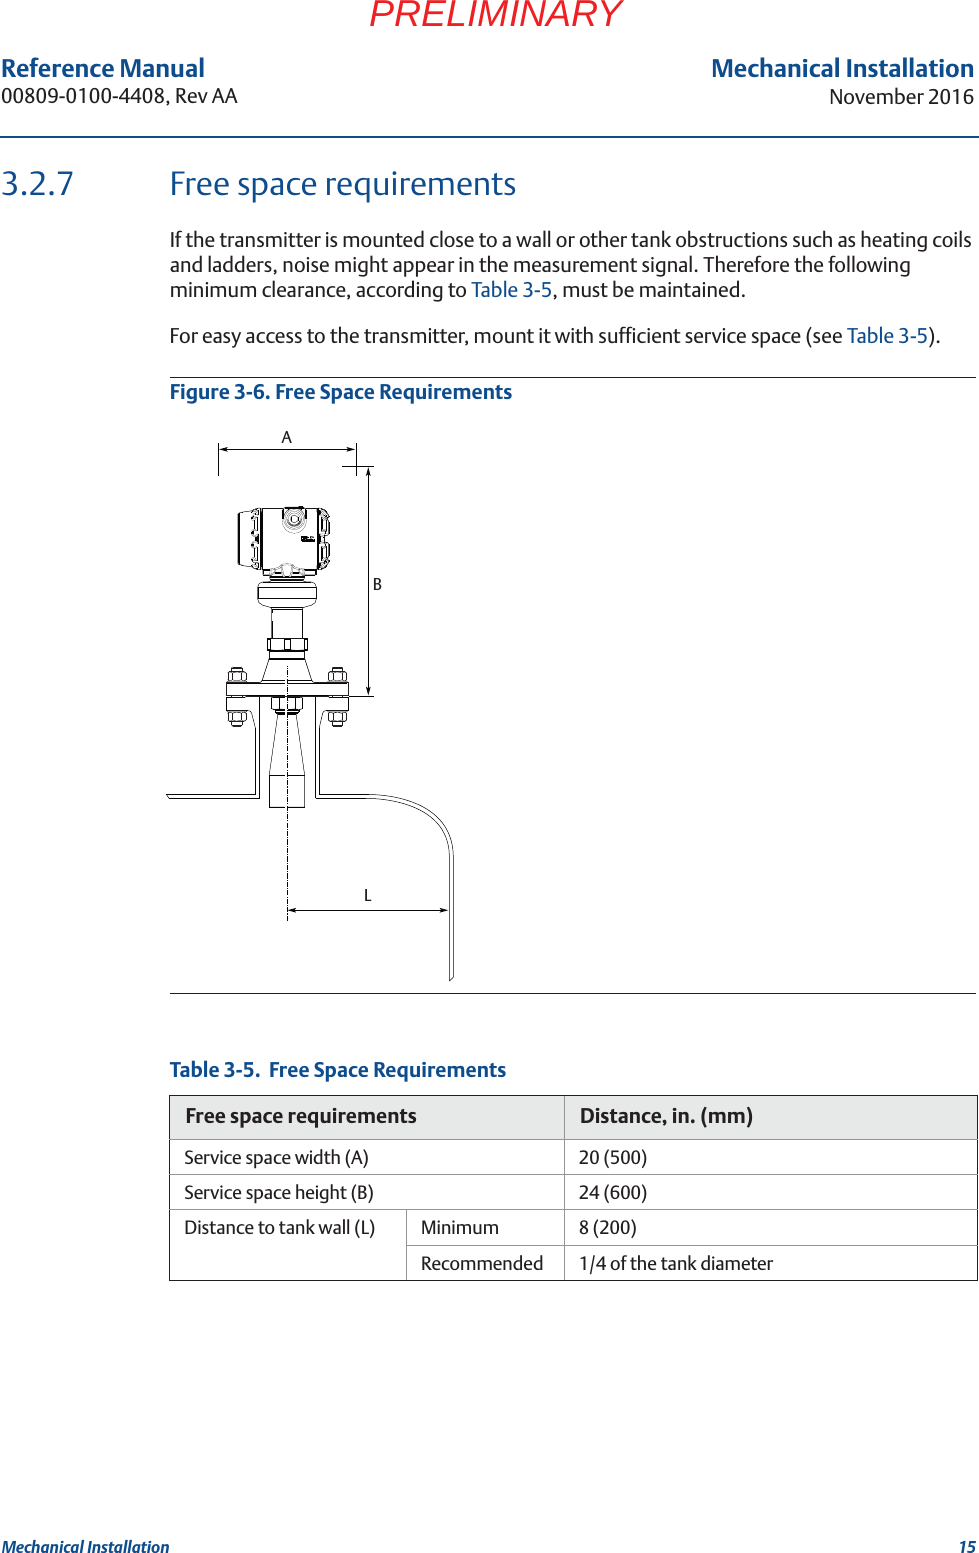 15Reference Manual 00809-0100-4408, Rev AAMechanical InstallationNovember 2016Mechanical InstallationPRELIMINARY3.2.7 Free space requirementsIf the transmitter is mounted close to a wall or other tank obstructions such as heating coils and ladders, noise might appear in the measurement signal. Therefore the following minimum clearance, according to Table 3-5, must be maintained.For easy access to the transmitter, mount it with sufficient service space (see Table 3-5).Figure 3-6. Free Space RequirementsTable 3-5.  Free Space RequirementsFree space requirements Distance, in. (mm)Service space width (A) 20 (500)Service space height (B) 24 (600)Distance to tank wall (L) Minimum 8 (200)Recommended 1/4 of the tank diameterLBA